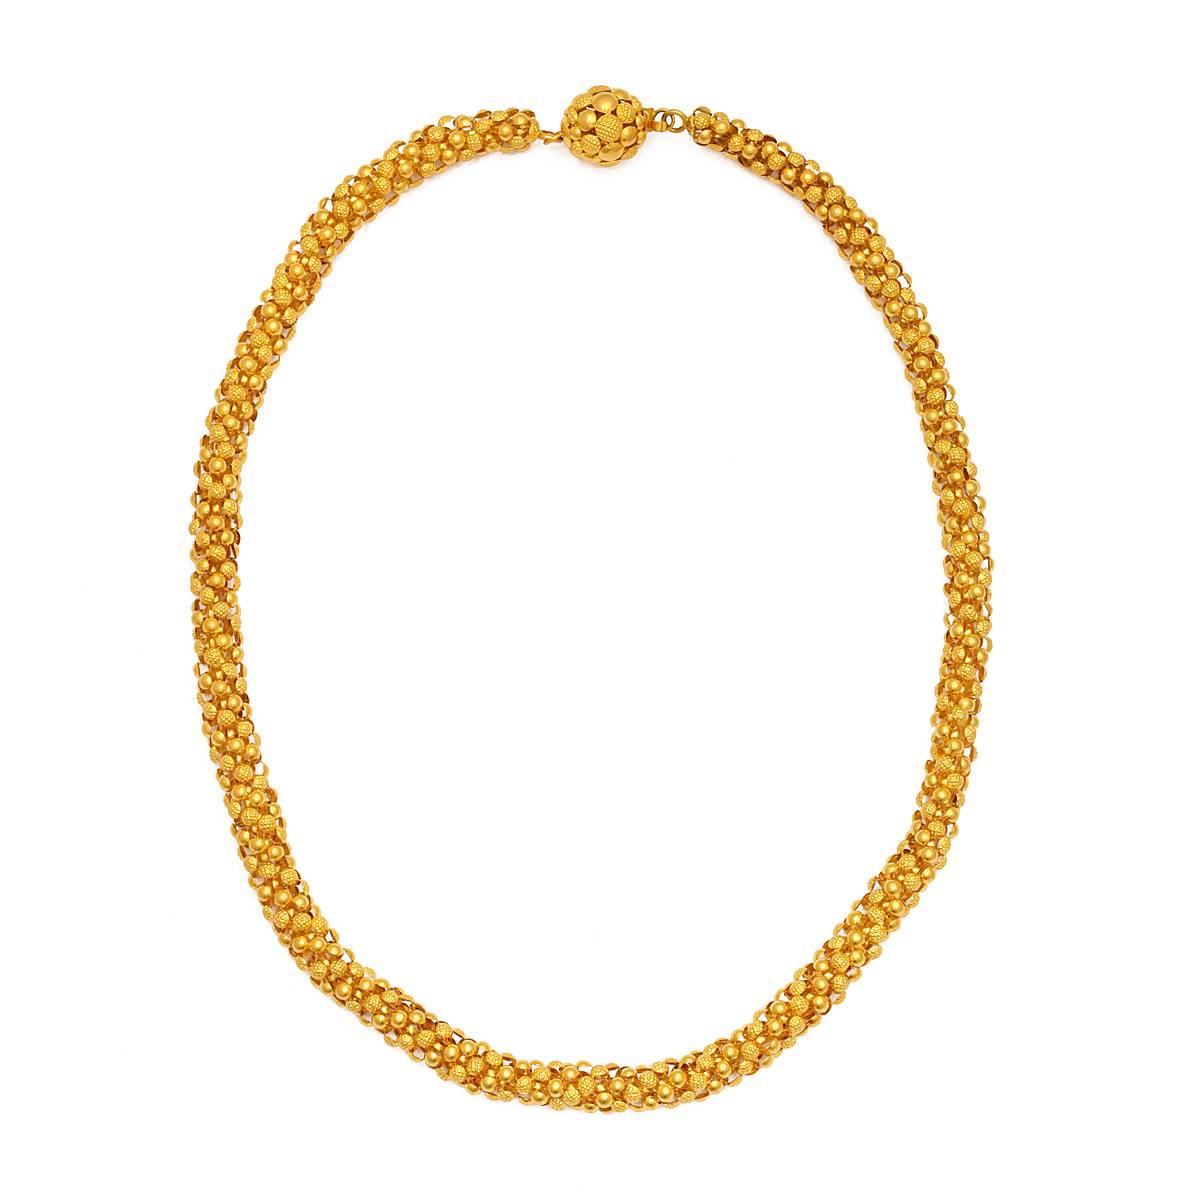 Georgian 15k thick openwork ornamented gold mesh chain with ball clasp.

English, ca. 1790
Length: 18 1/2 inches
Width: 1/4 inch